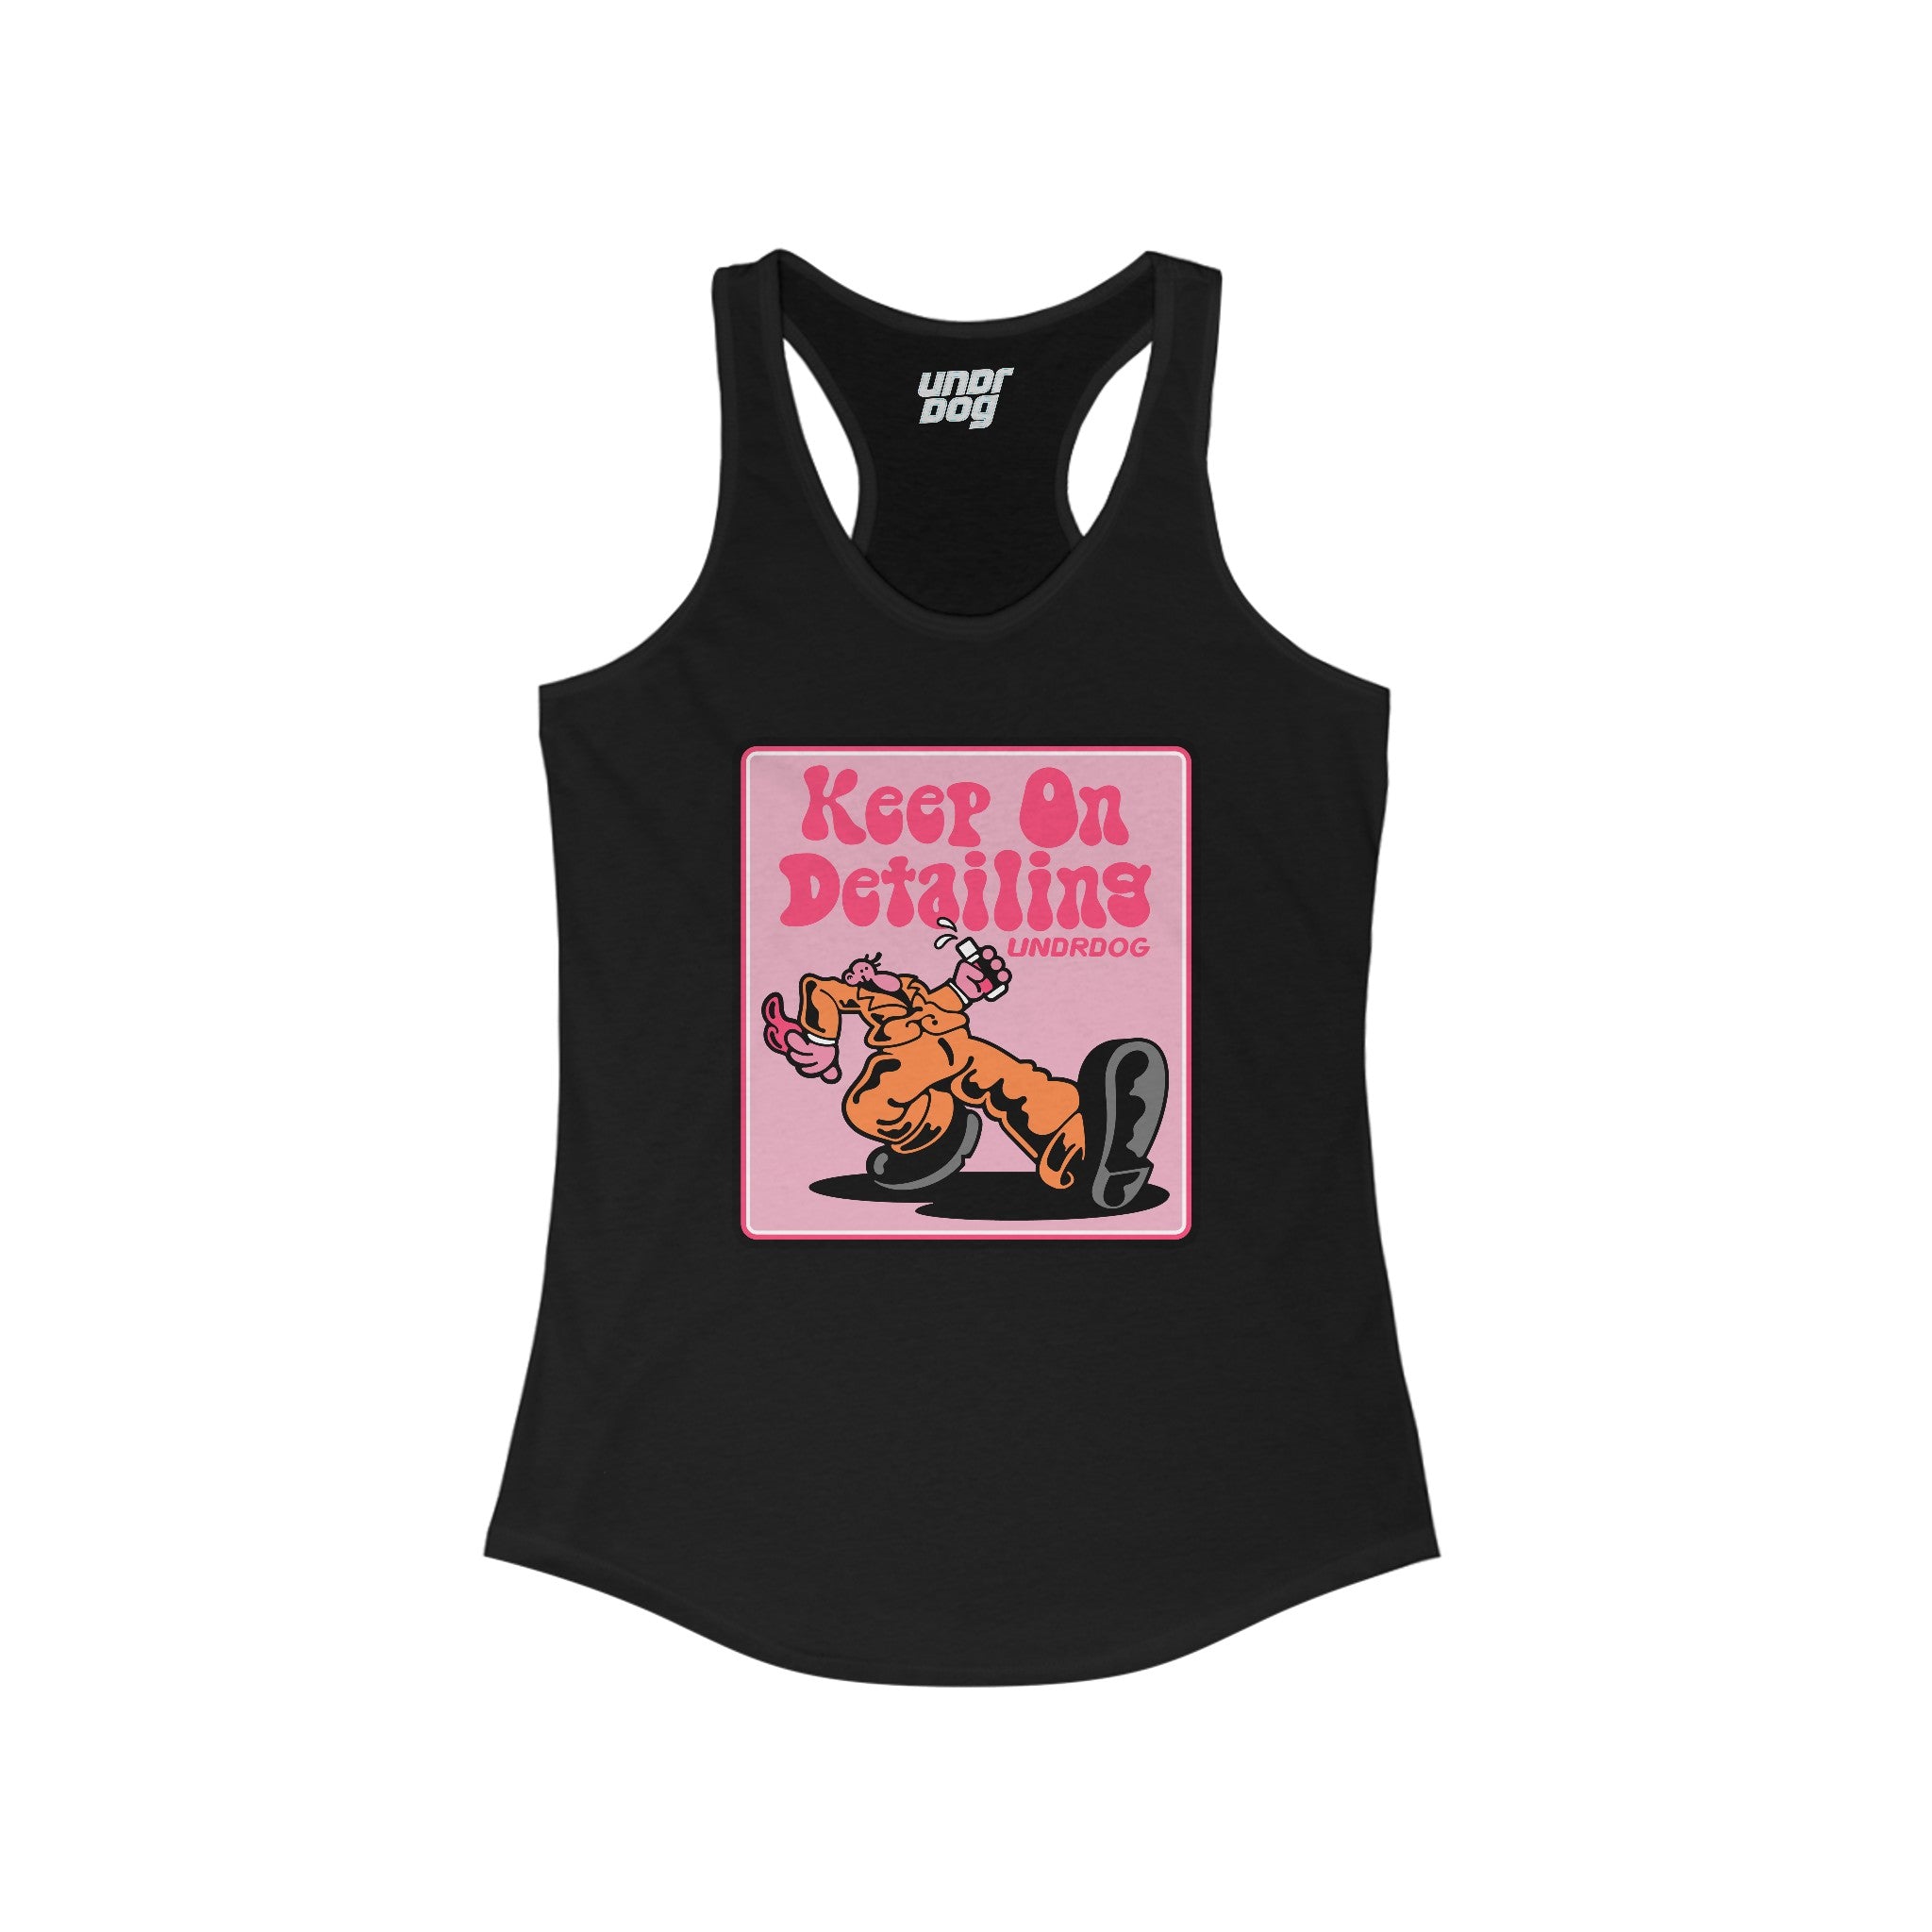 8411518603509071357_2048.jpg - Keep on Detailing Women's Tank - Undrdog Surface Products